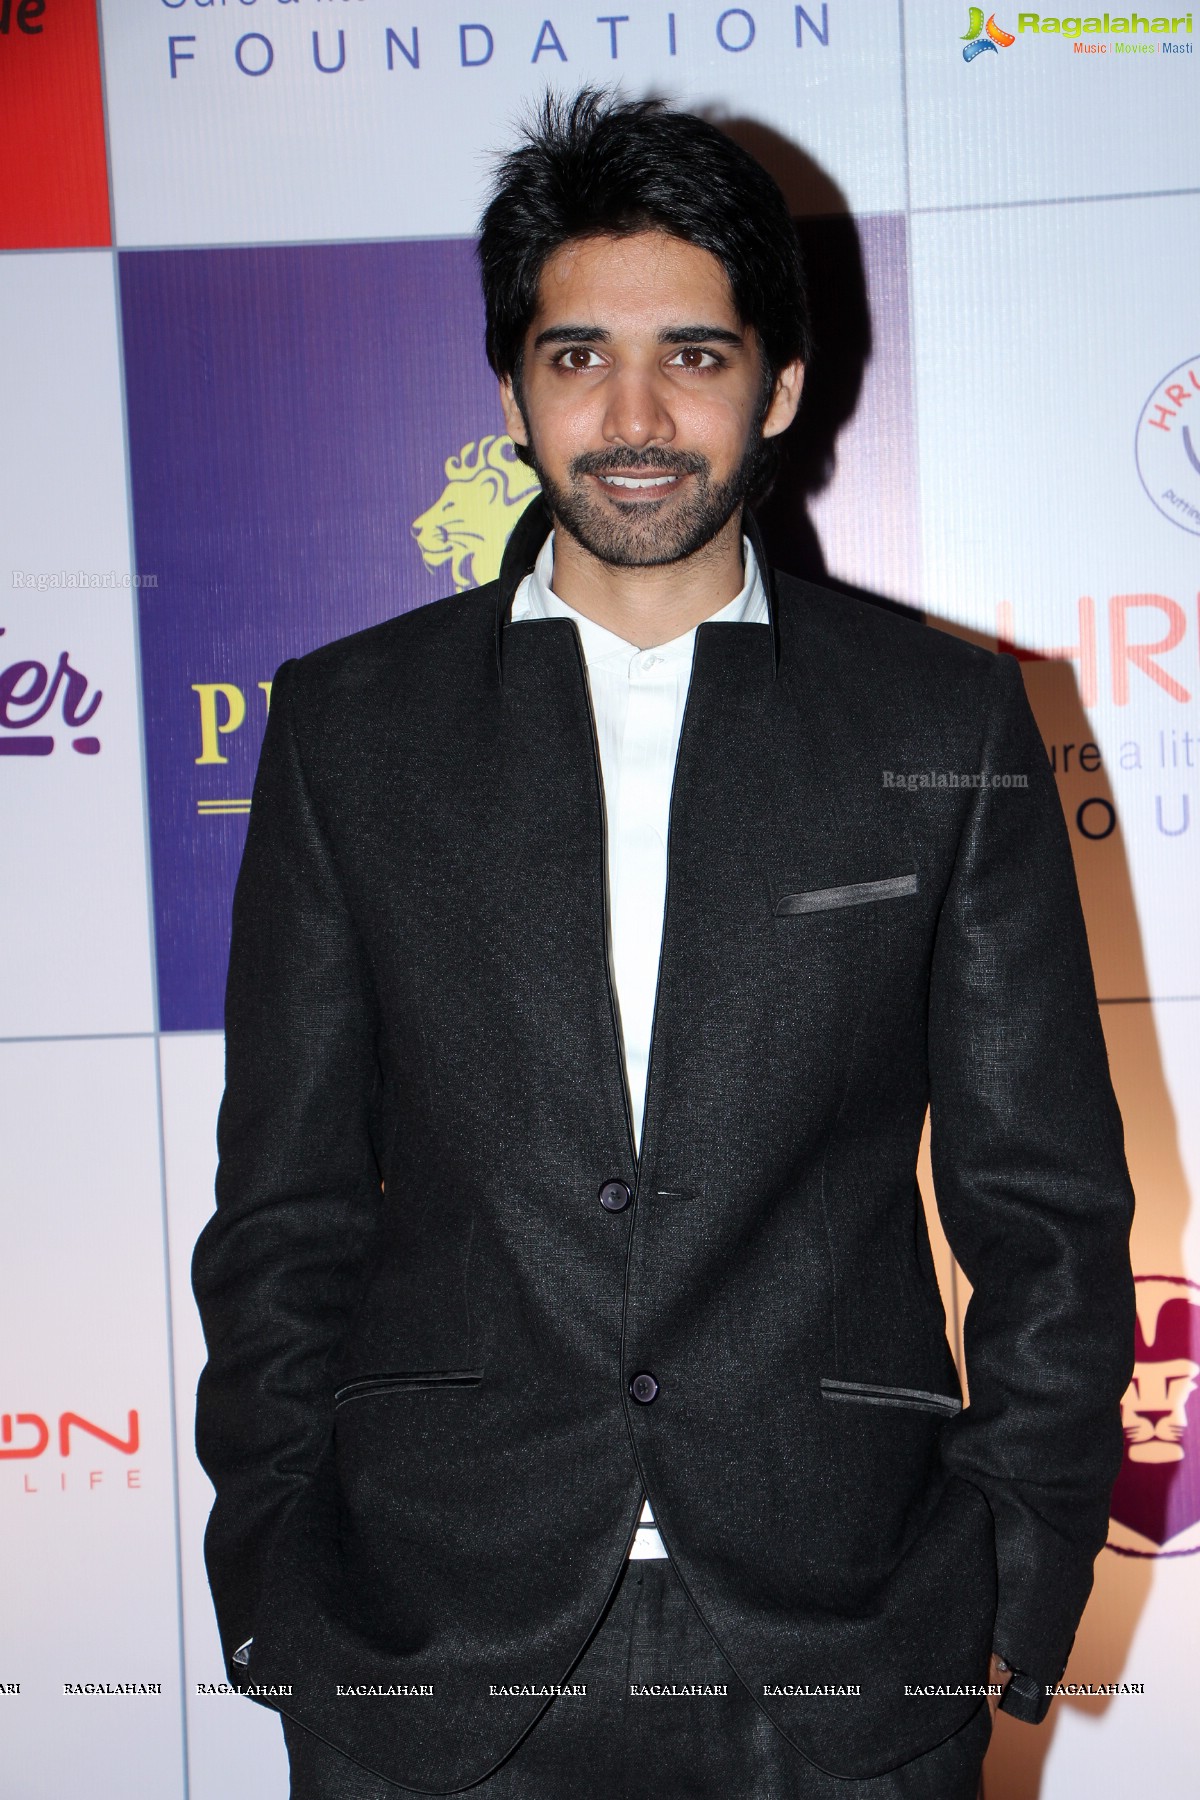 Celebrities at 100 Hearts Red Carpet by CCL